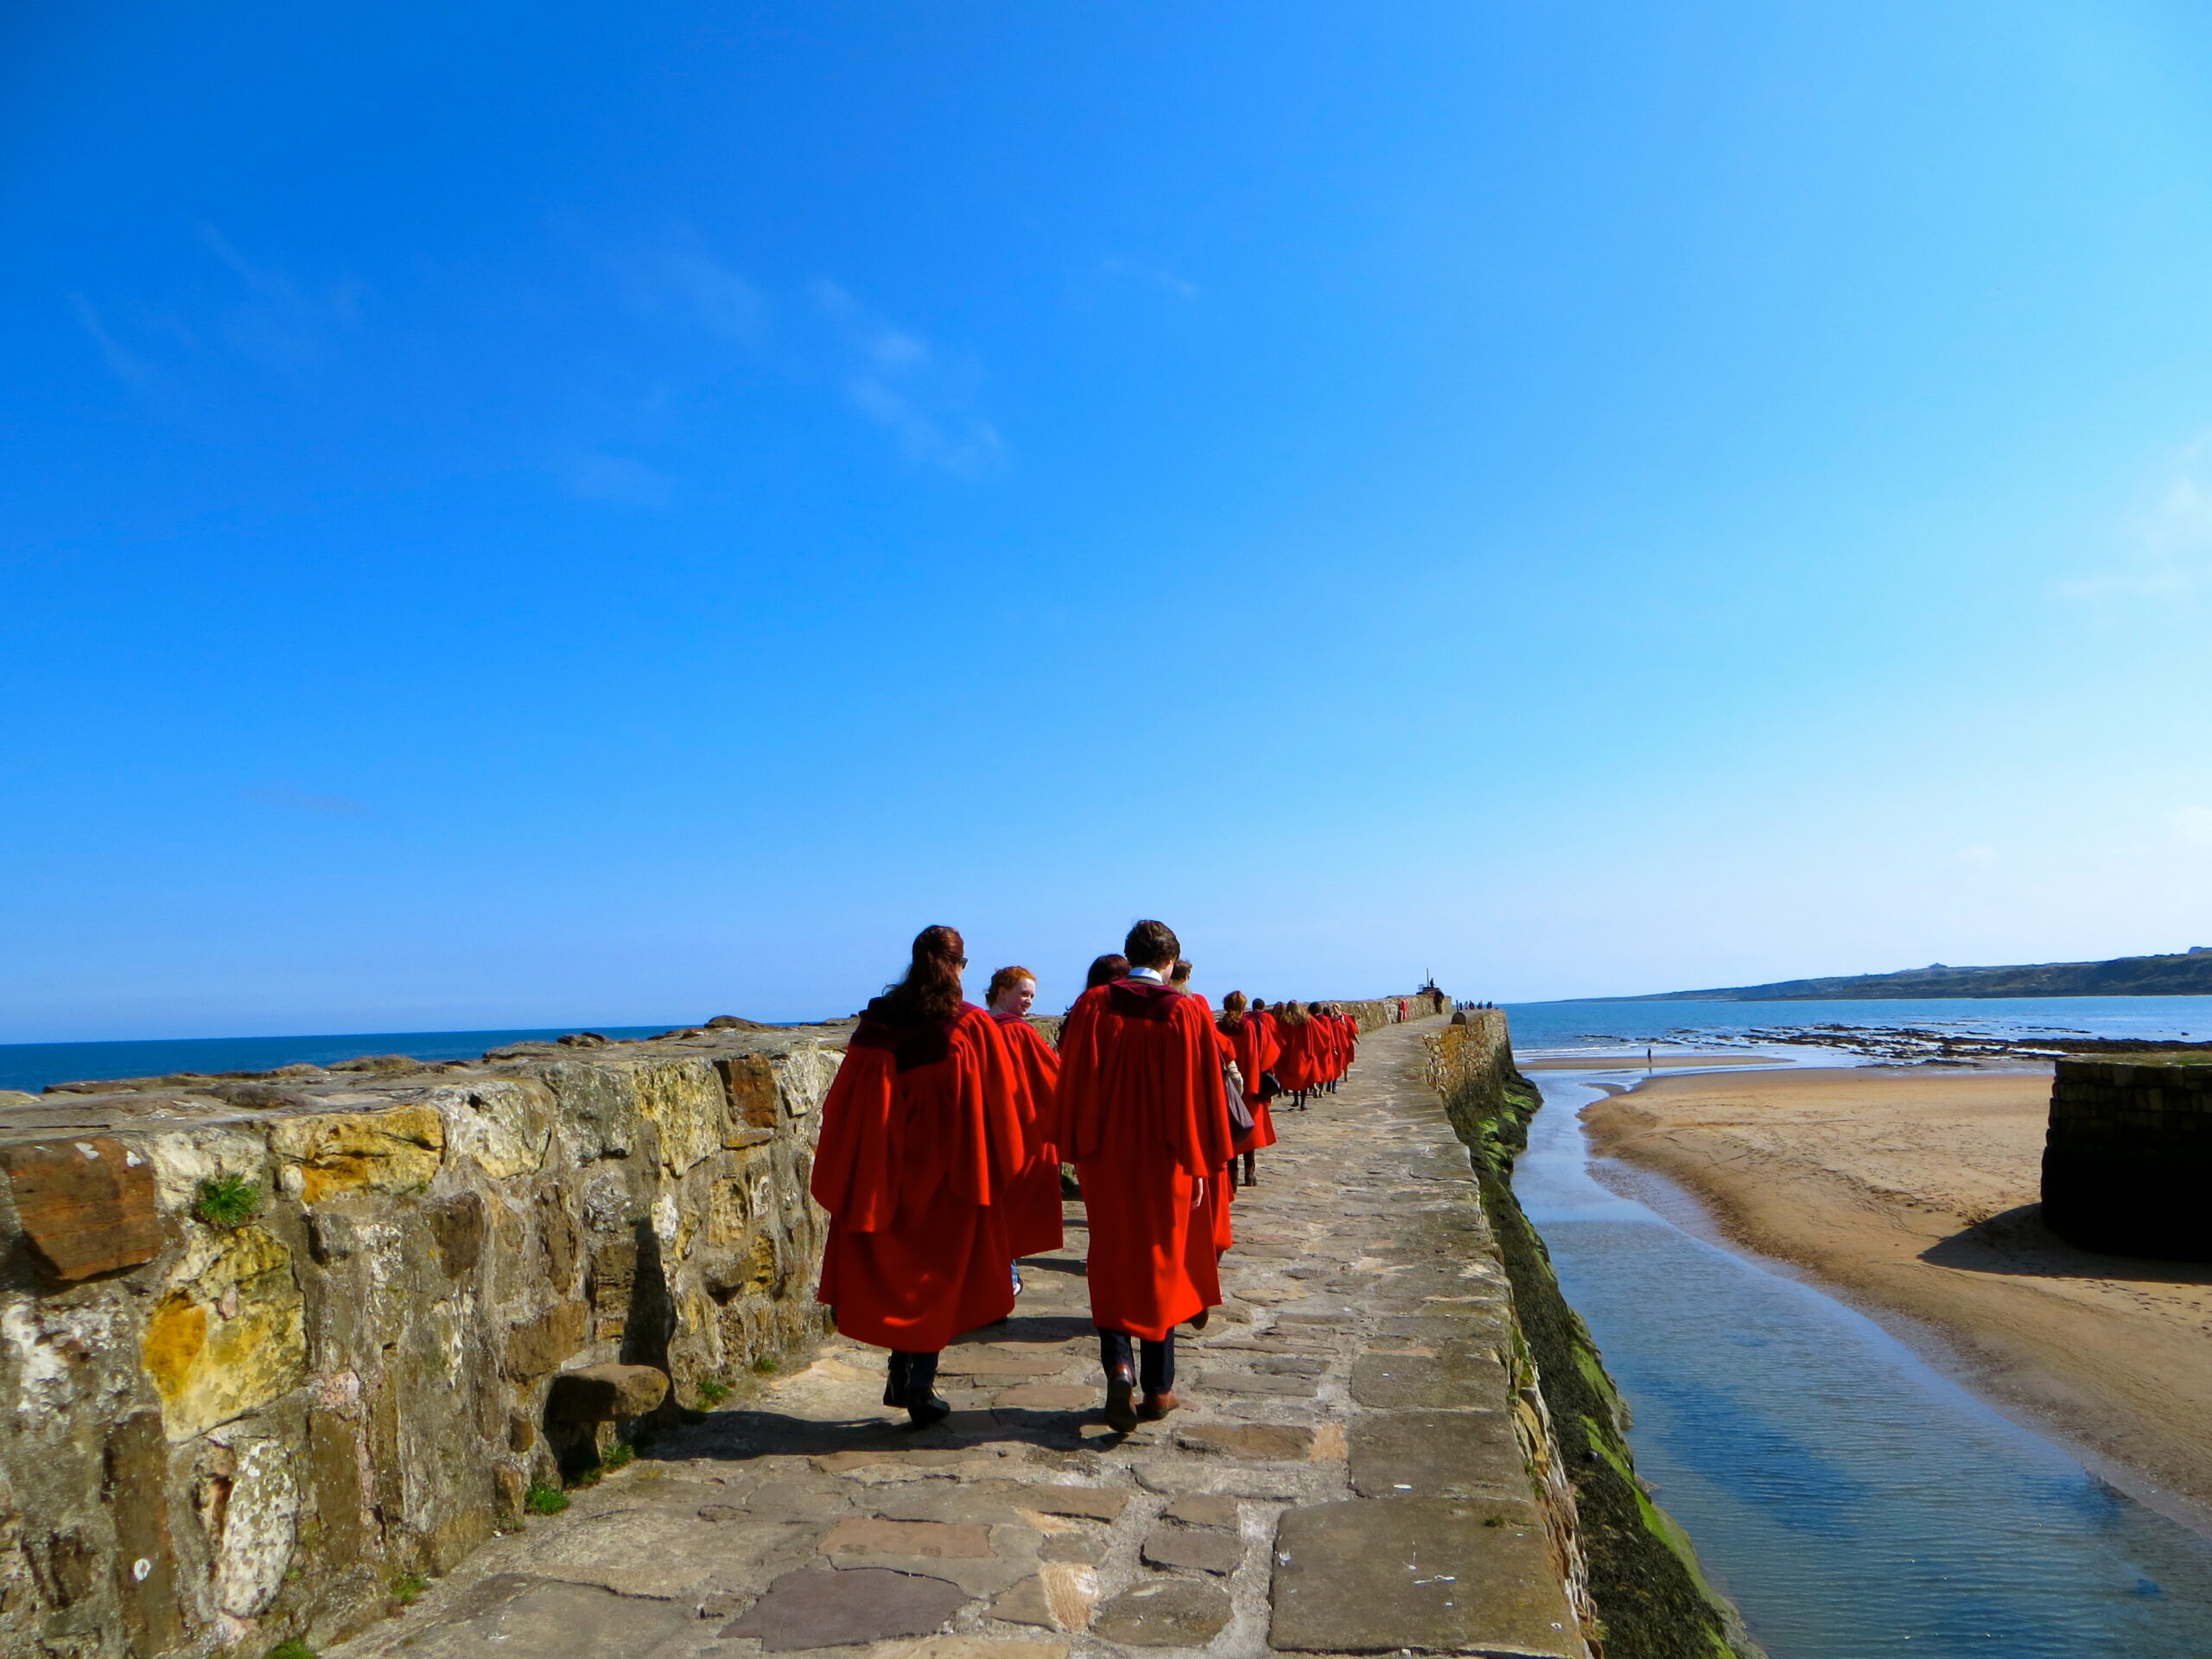 New students embrace one of the University of St Andrews' traditions by taking part in the annual Pier Walk while wearing their red gowns.